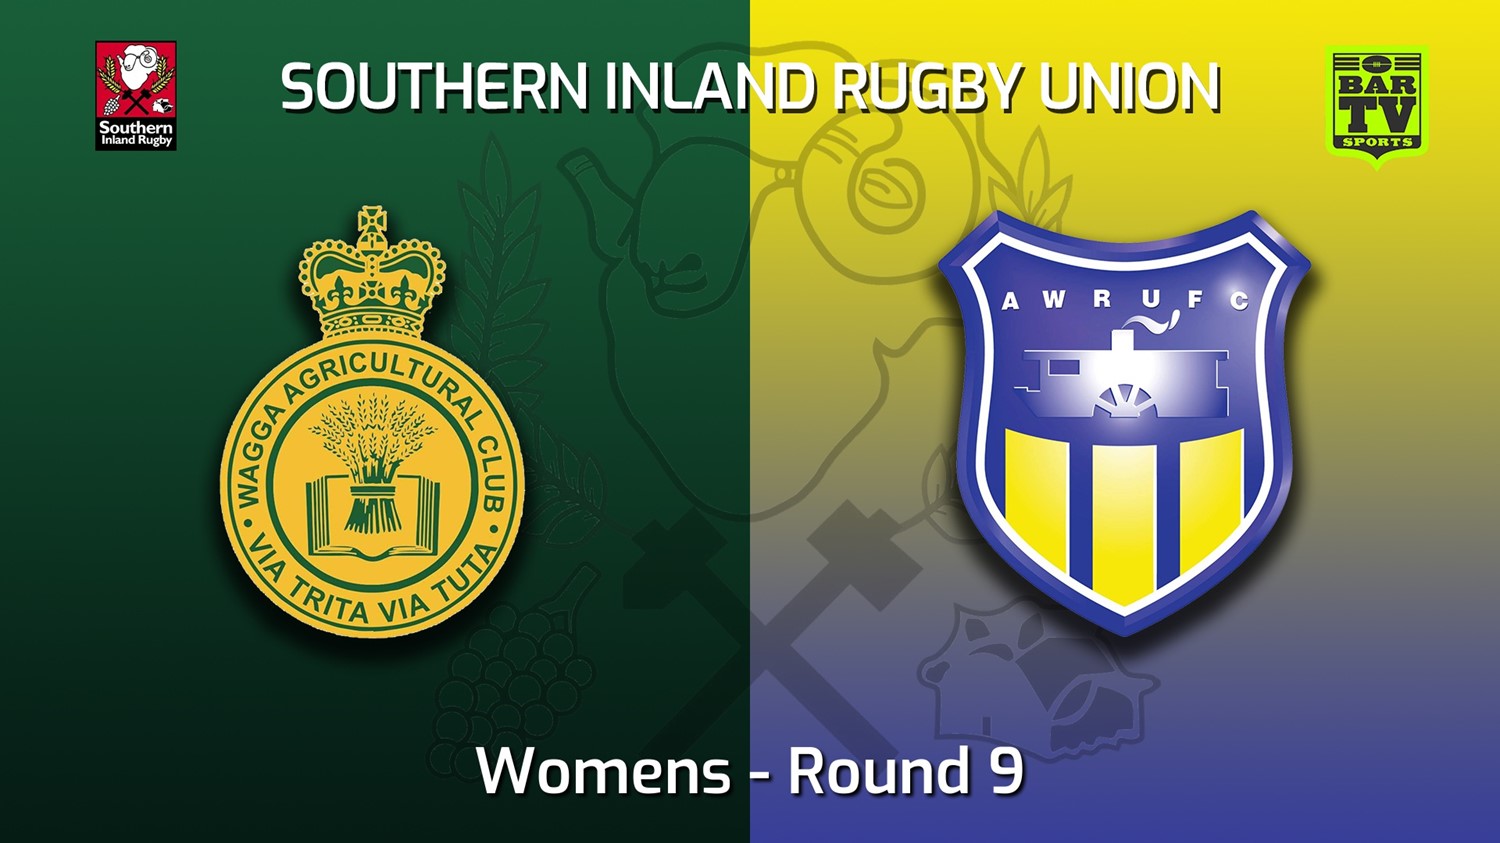 220604-Southern Inland Rugby Union Round 9 - Womens - Wagga Agricultural College v Albury Steamers Minigame Slate Image